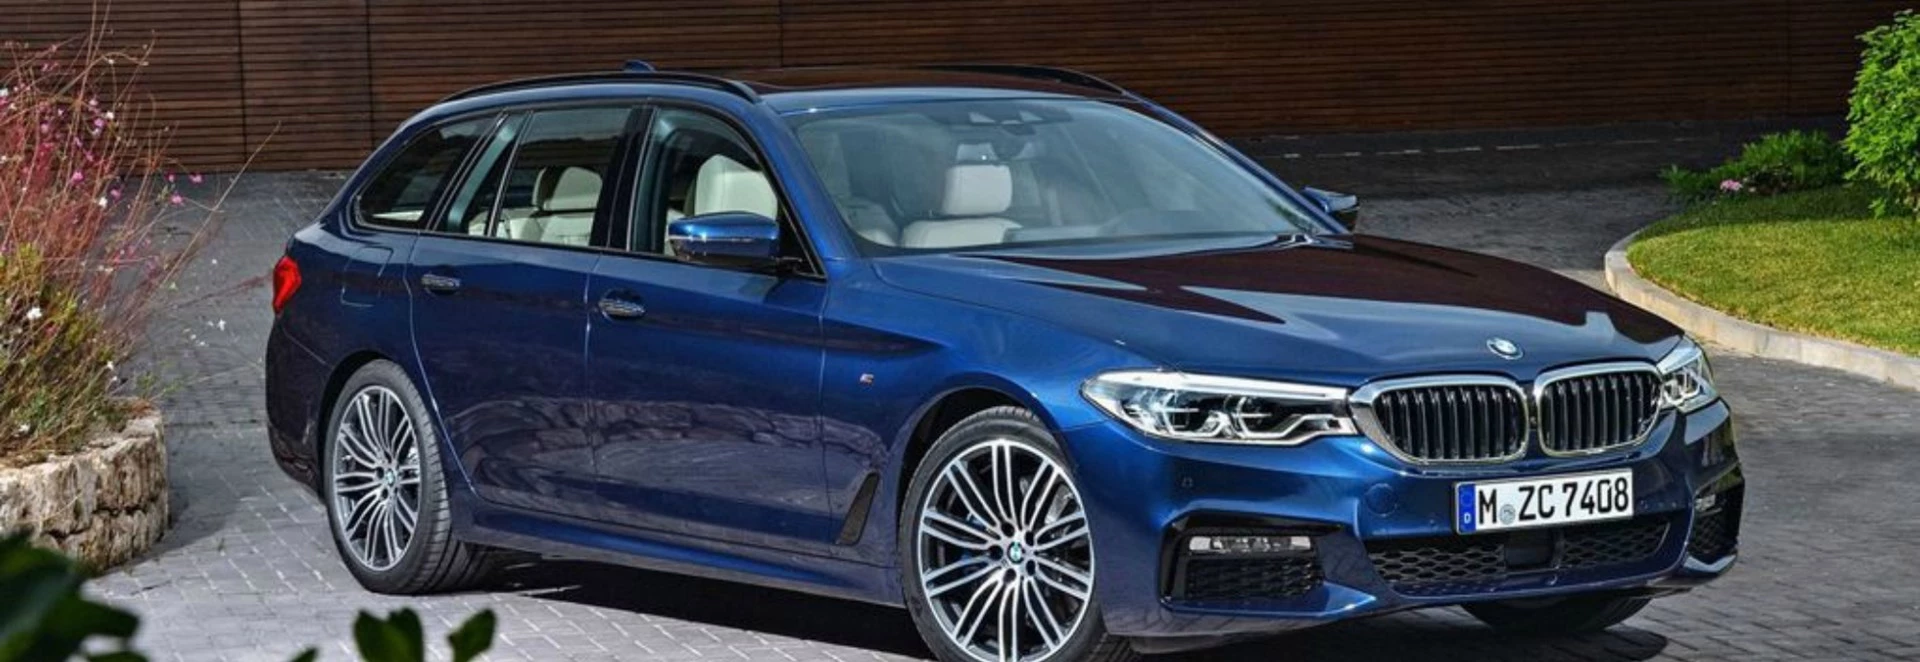 2017 BMW 5 Series Touring is lighter and more practical 